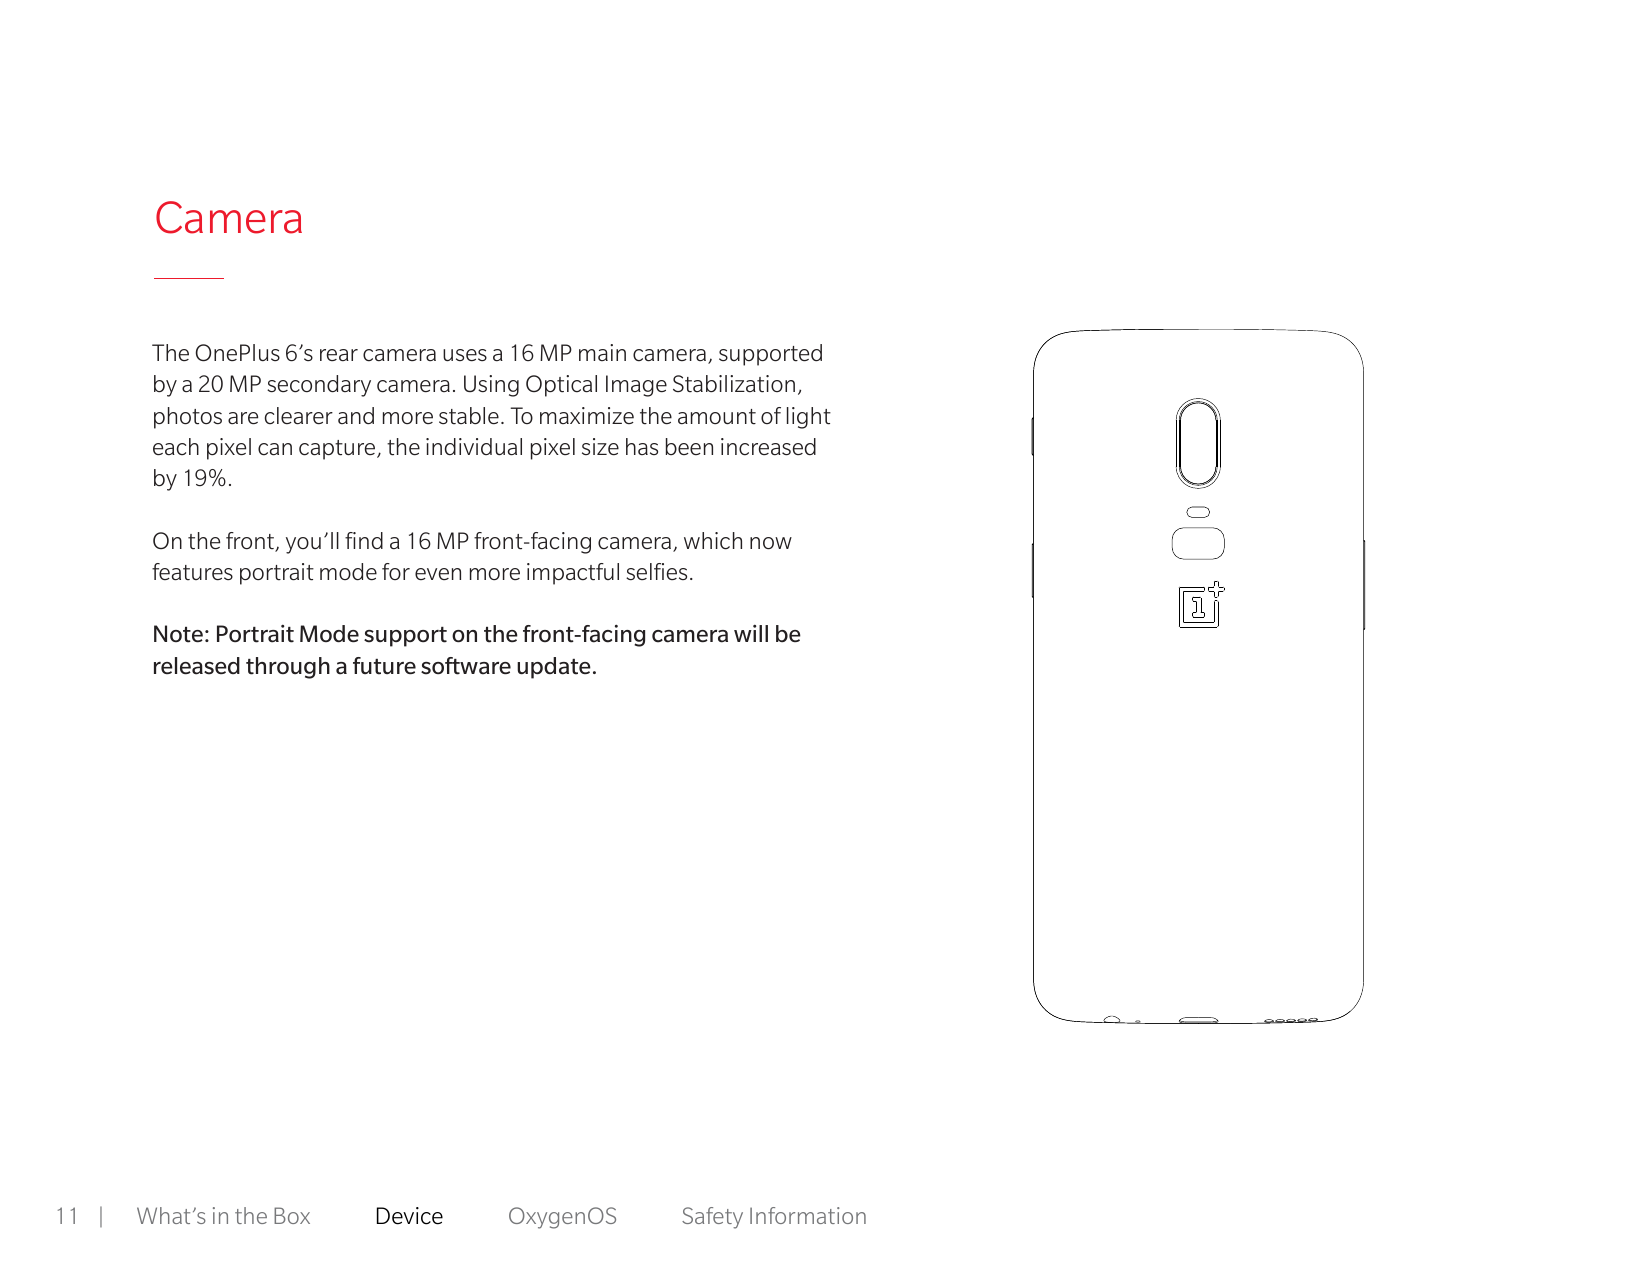 CameraThe OnePlus 6’s rear camera uses a 16 MP main camera, supportedby a 20 MP secondary camera. Using Optical Image Stabilizat